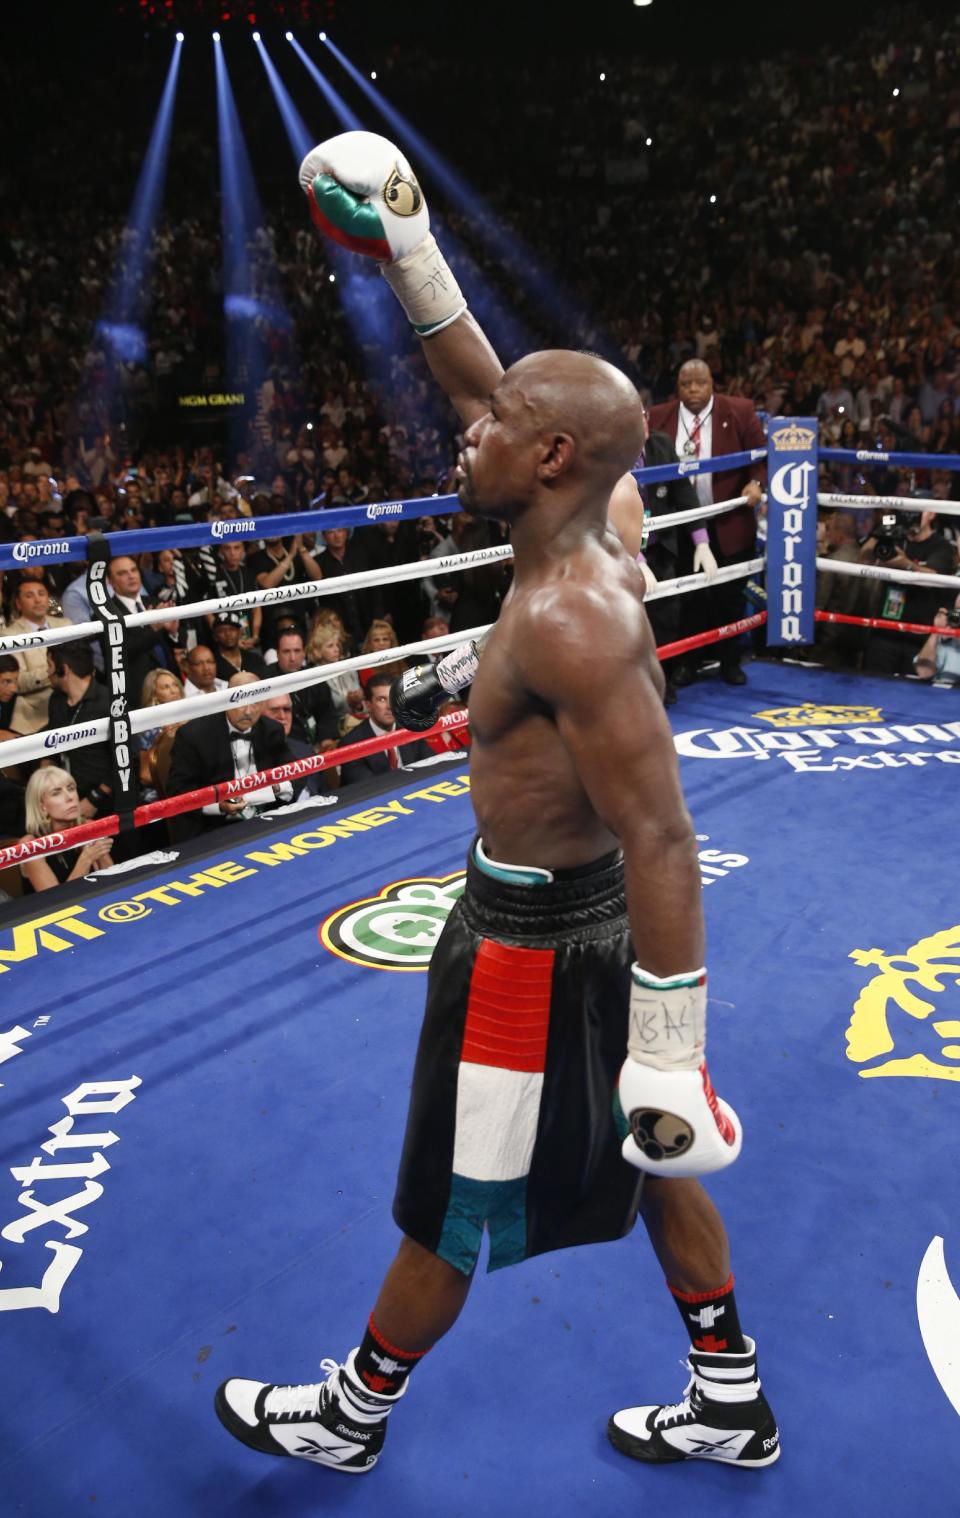 Floyd Mayweather Jr. celebrates his majority decision win over Marcos Maidana in their WBC-WBA welterweight title boxing fight Saturday, May 3, 2014, in Las Vegas. (AP Photo/Eric Jamison)